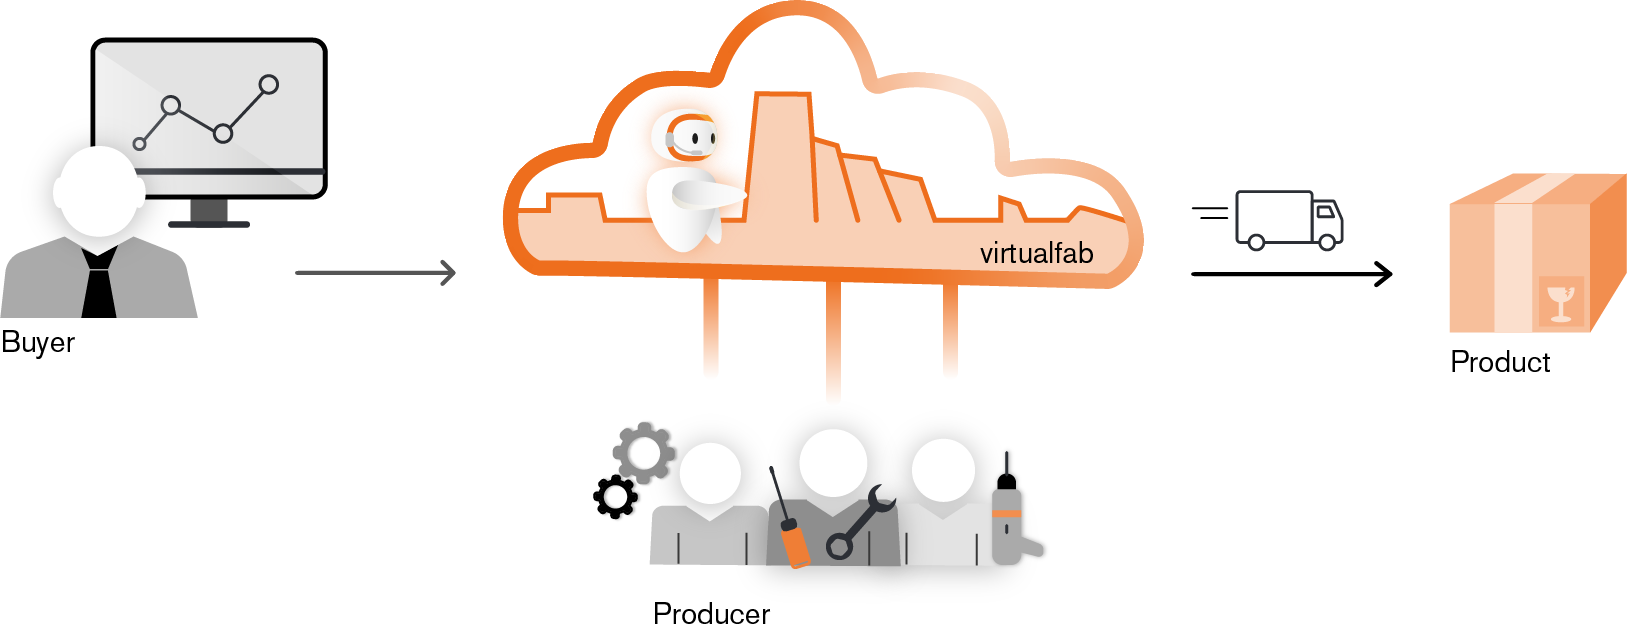 the virtualfab cloud brings industrial buyers and producers together in a digital twin factory, producing real physical products as a result